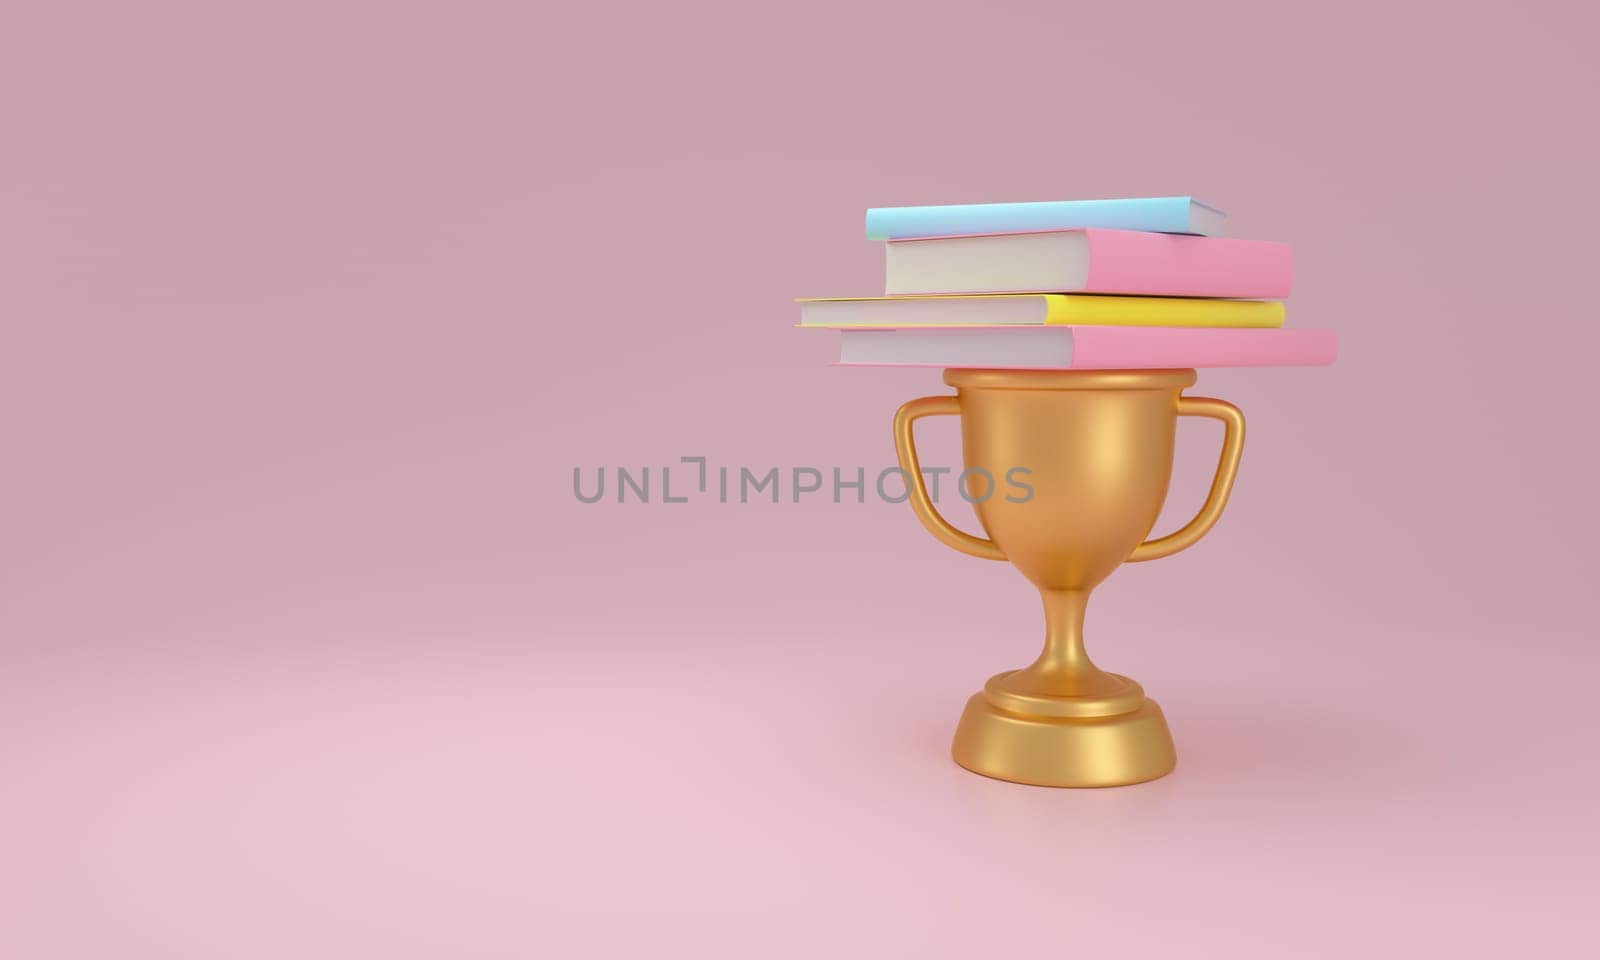 Pastel-colored books atop a golden trophy, set against a pink backdrop, depict the theme of academic success and recognition. 3D illustration.